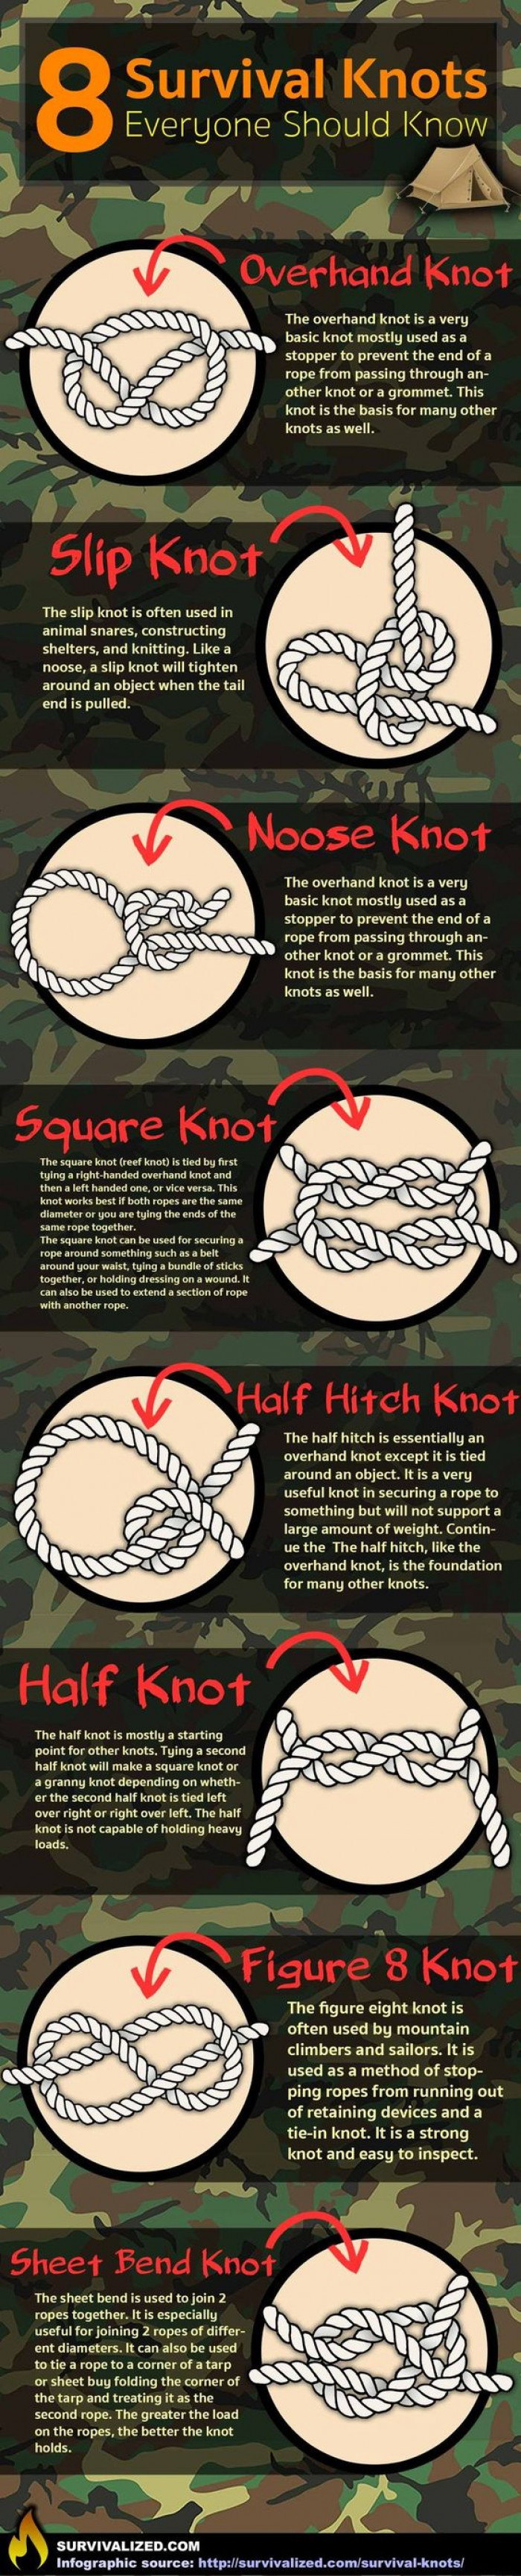 8 Survival Knots That May One Day Save Your Life